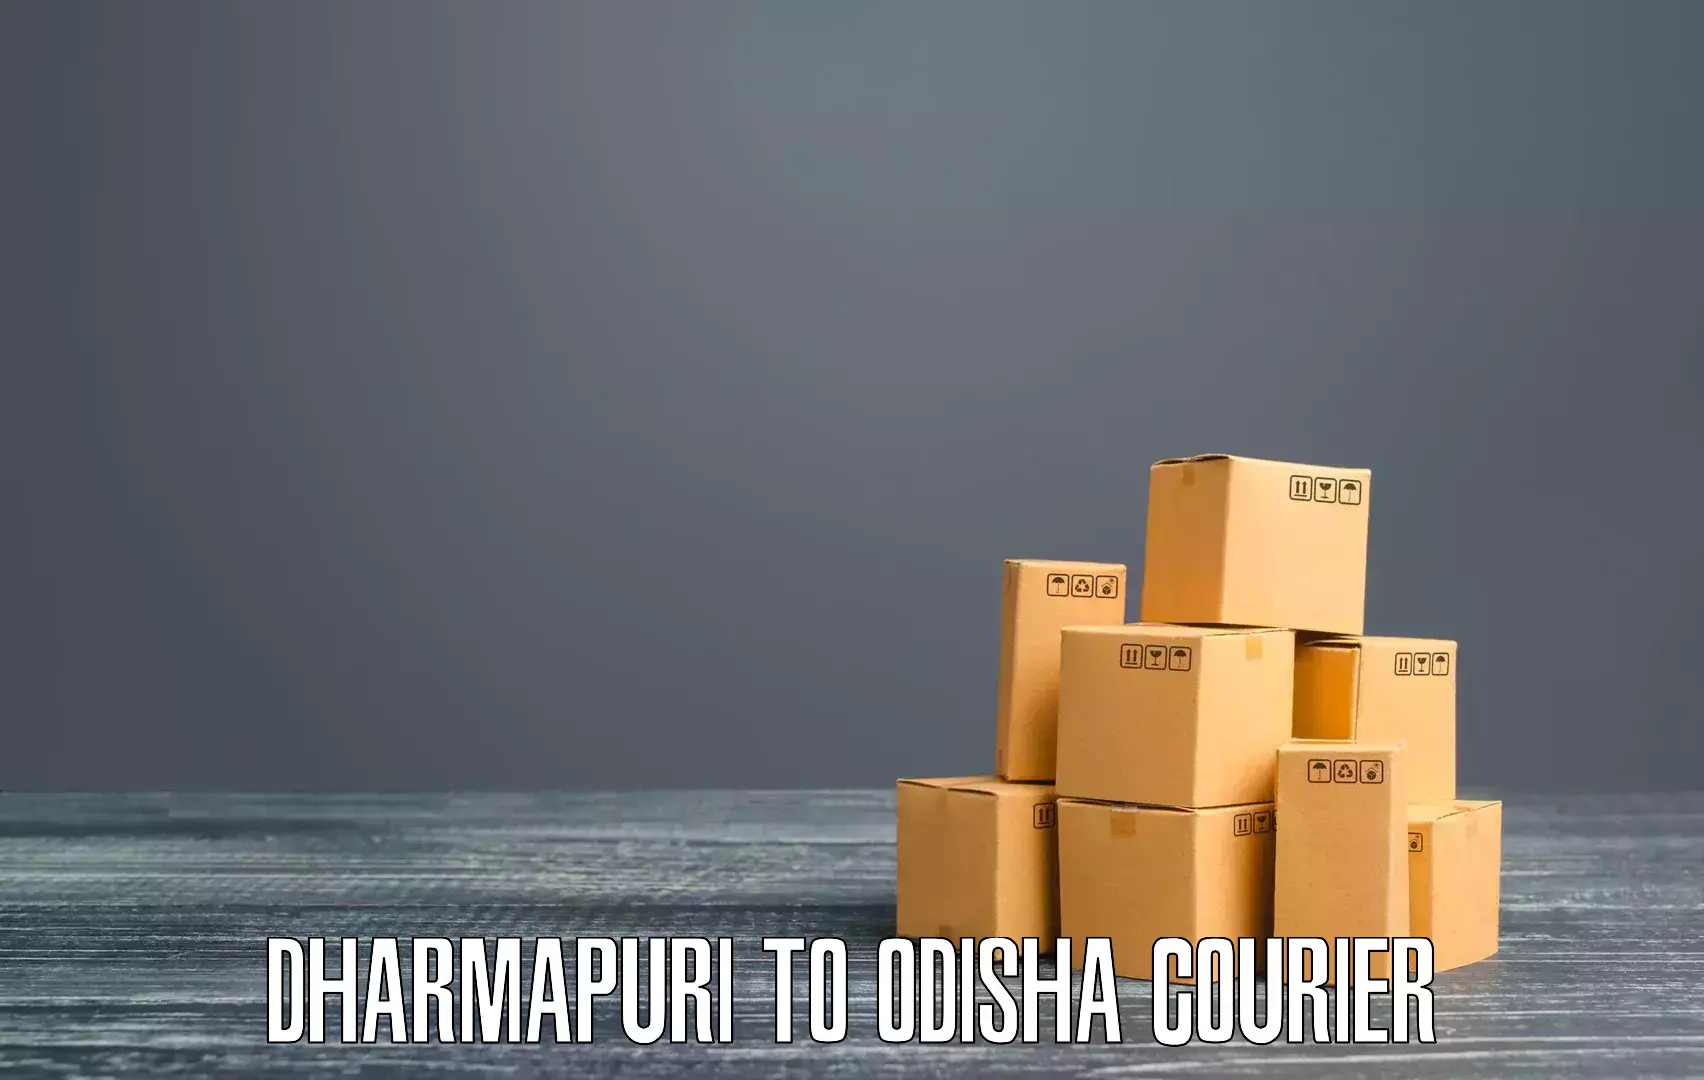 Cash on delivery service Dharmapuri to Paradip Port